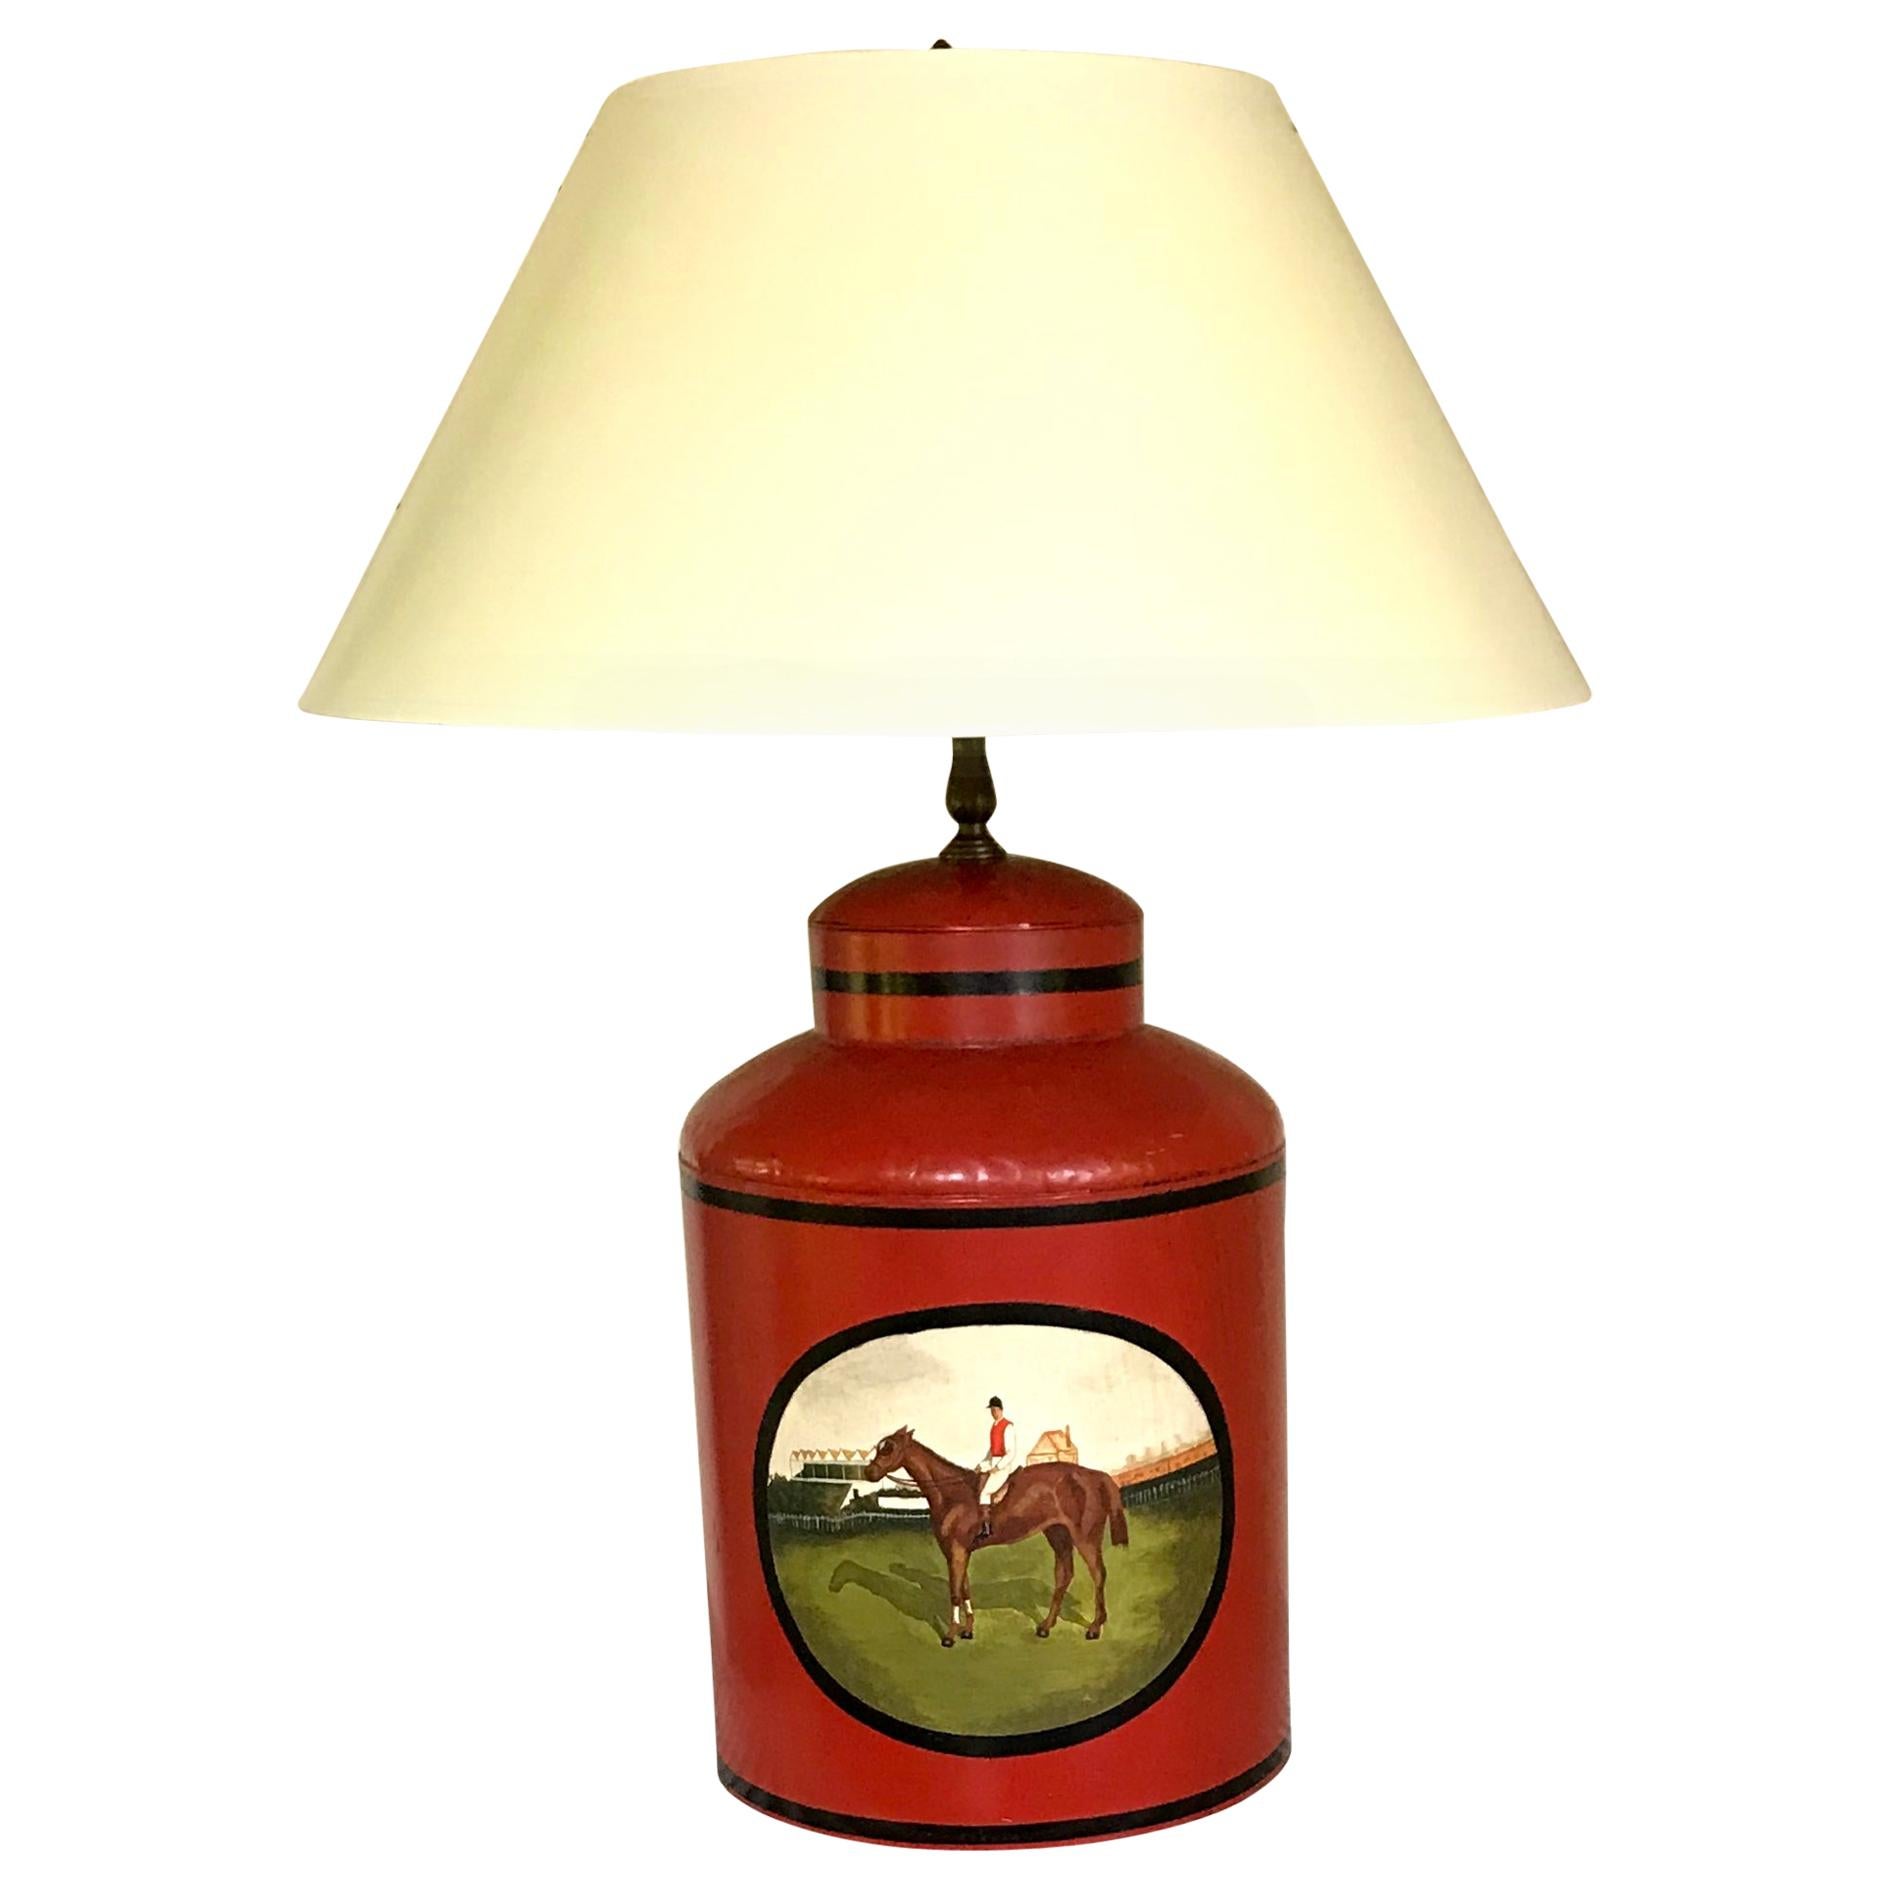 Derby tole horse lamp. American summer at the races tole milk jug painted red ground with black banding centering on a jockey astride a racehorse with viewing stand in the background. For the equestrian householder. Perfect at Pimlico, Hialeah,